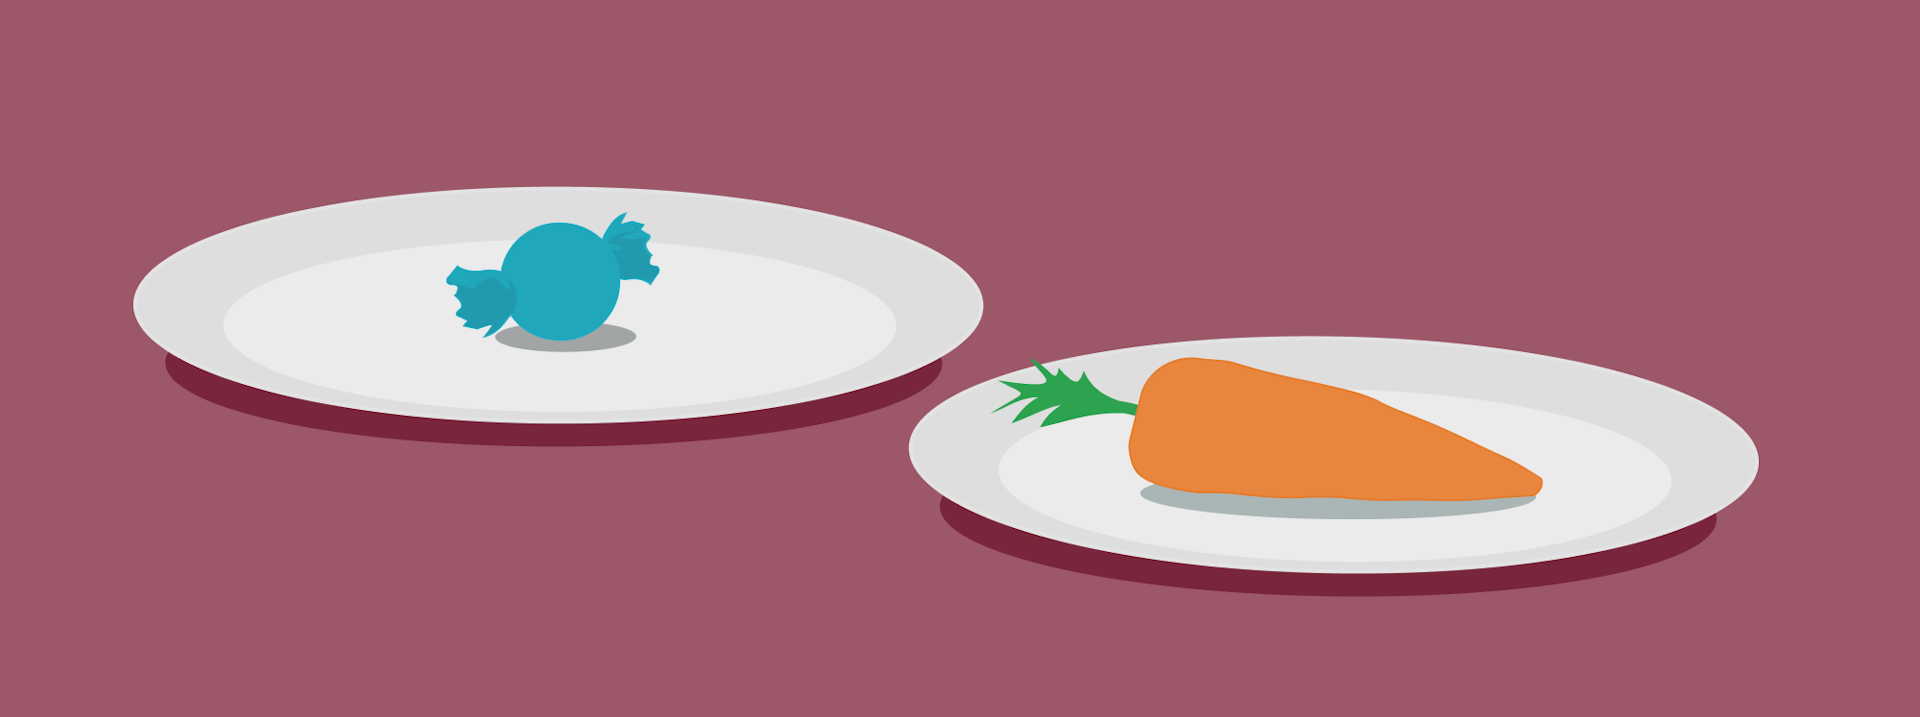 One plate with a sweet, one plate with a carrot. 